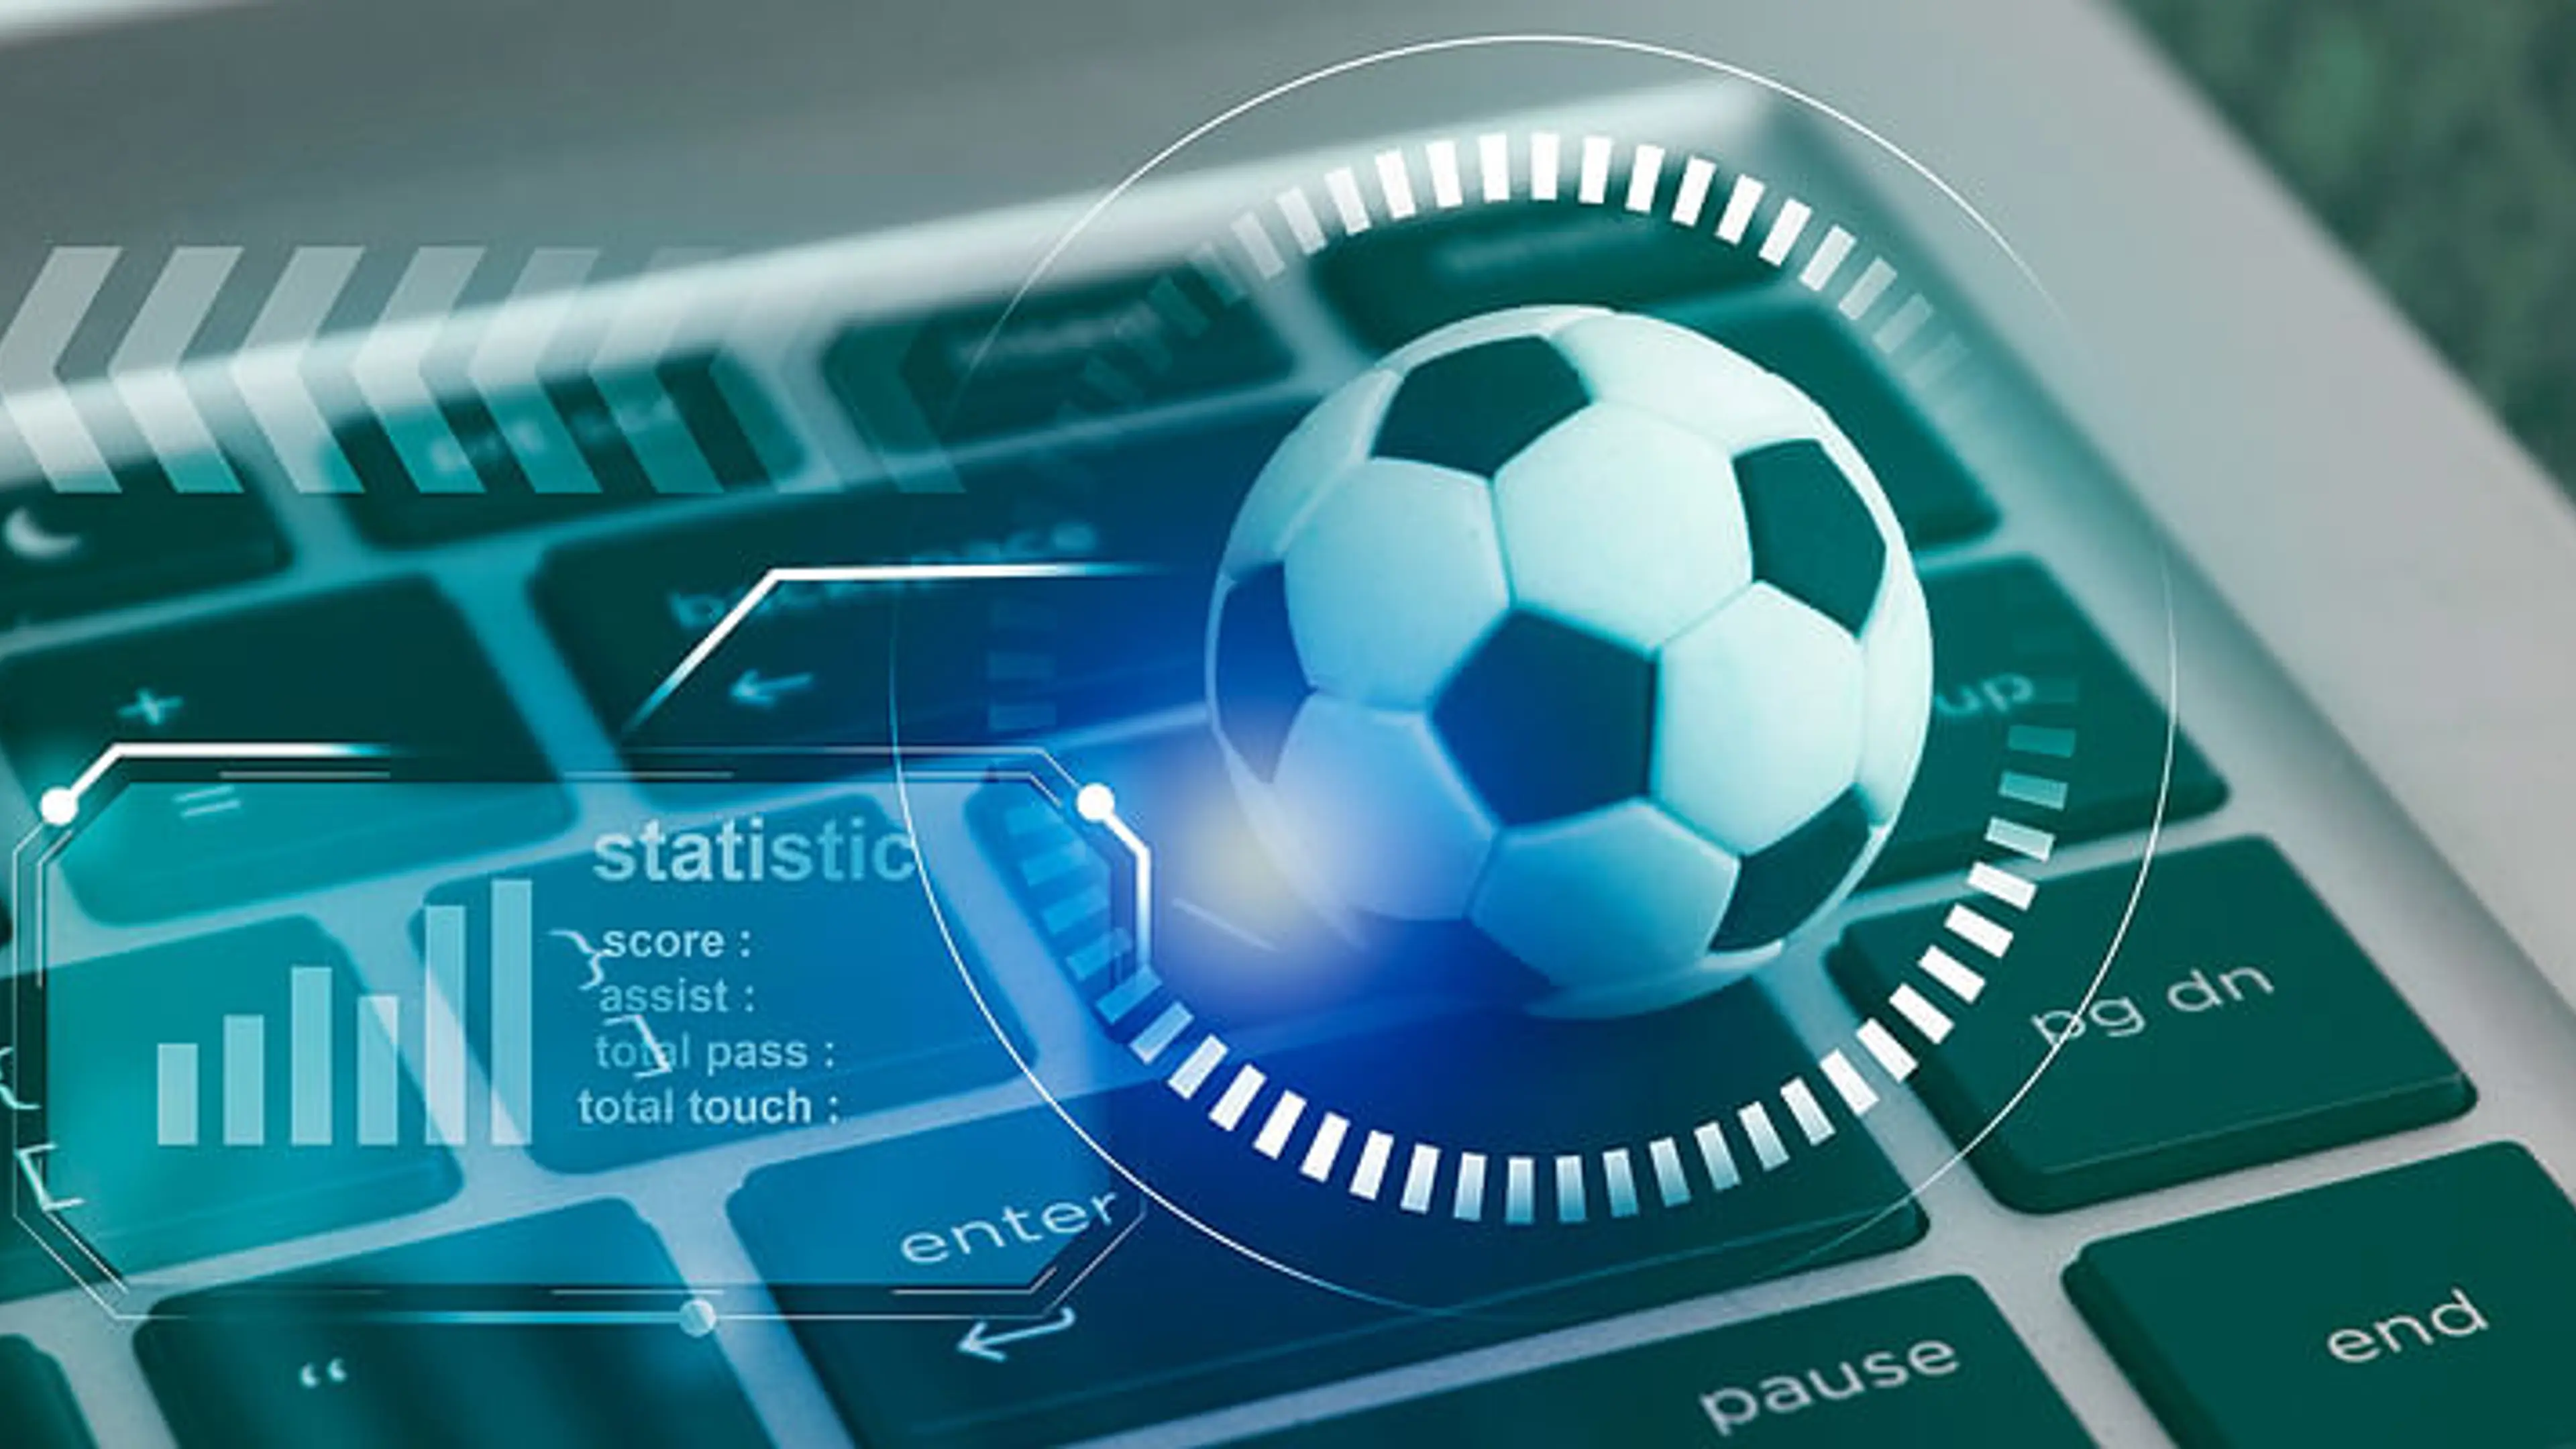 Role of emerging technologies in sports merchandising